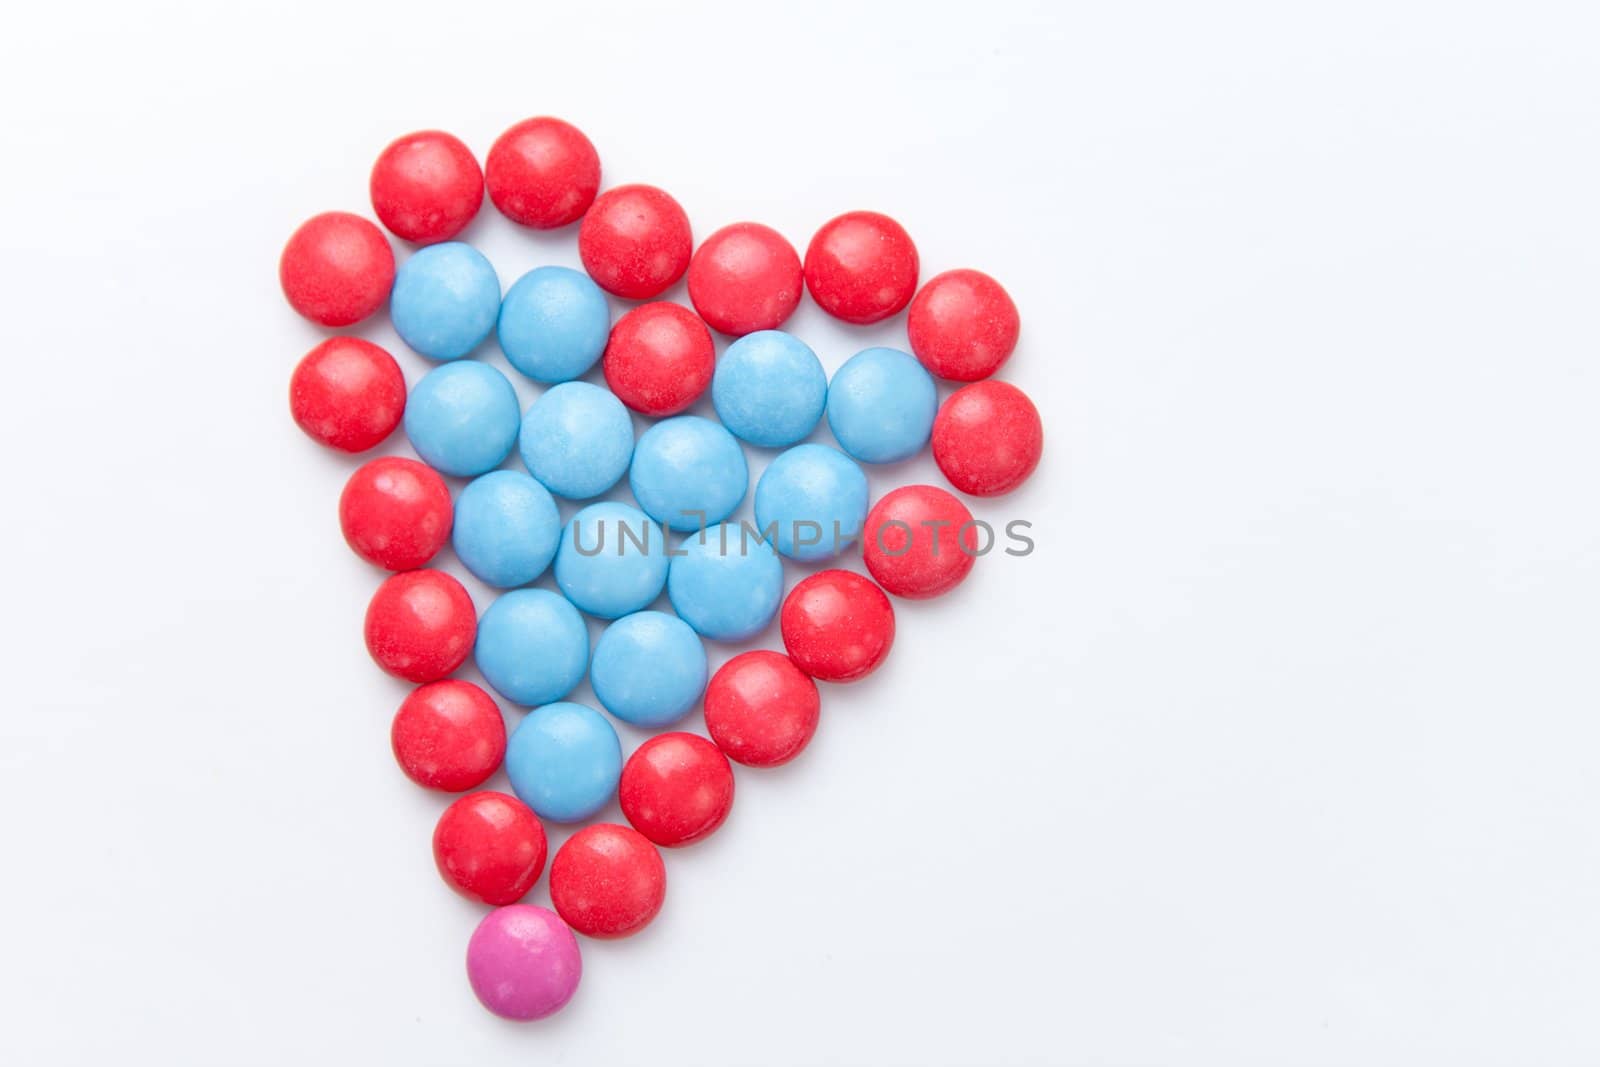 Heart of  chocolate candies against a white background